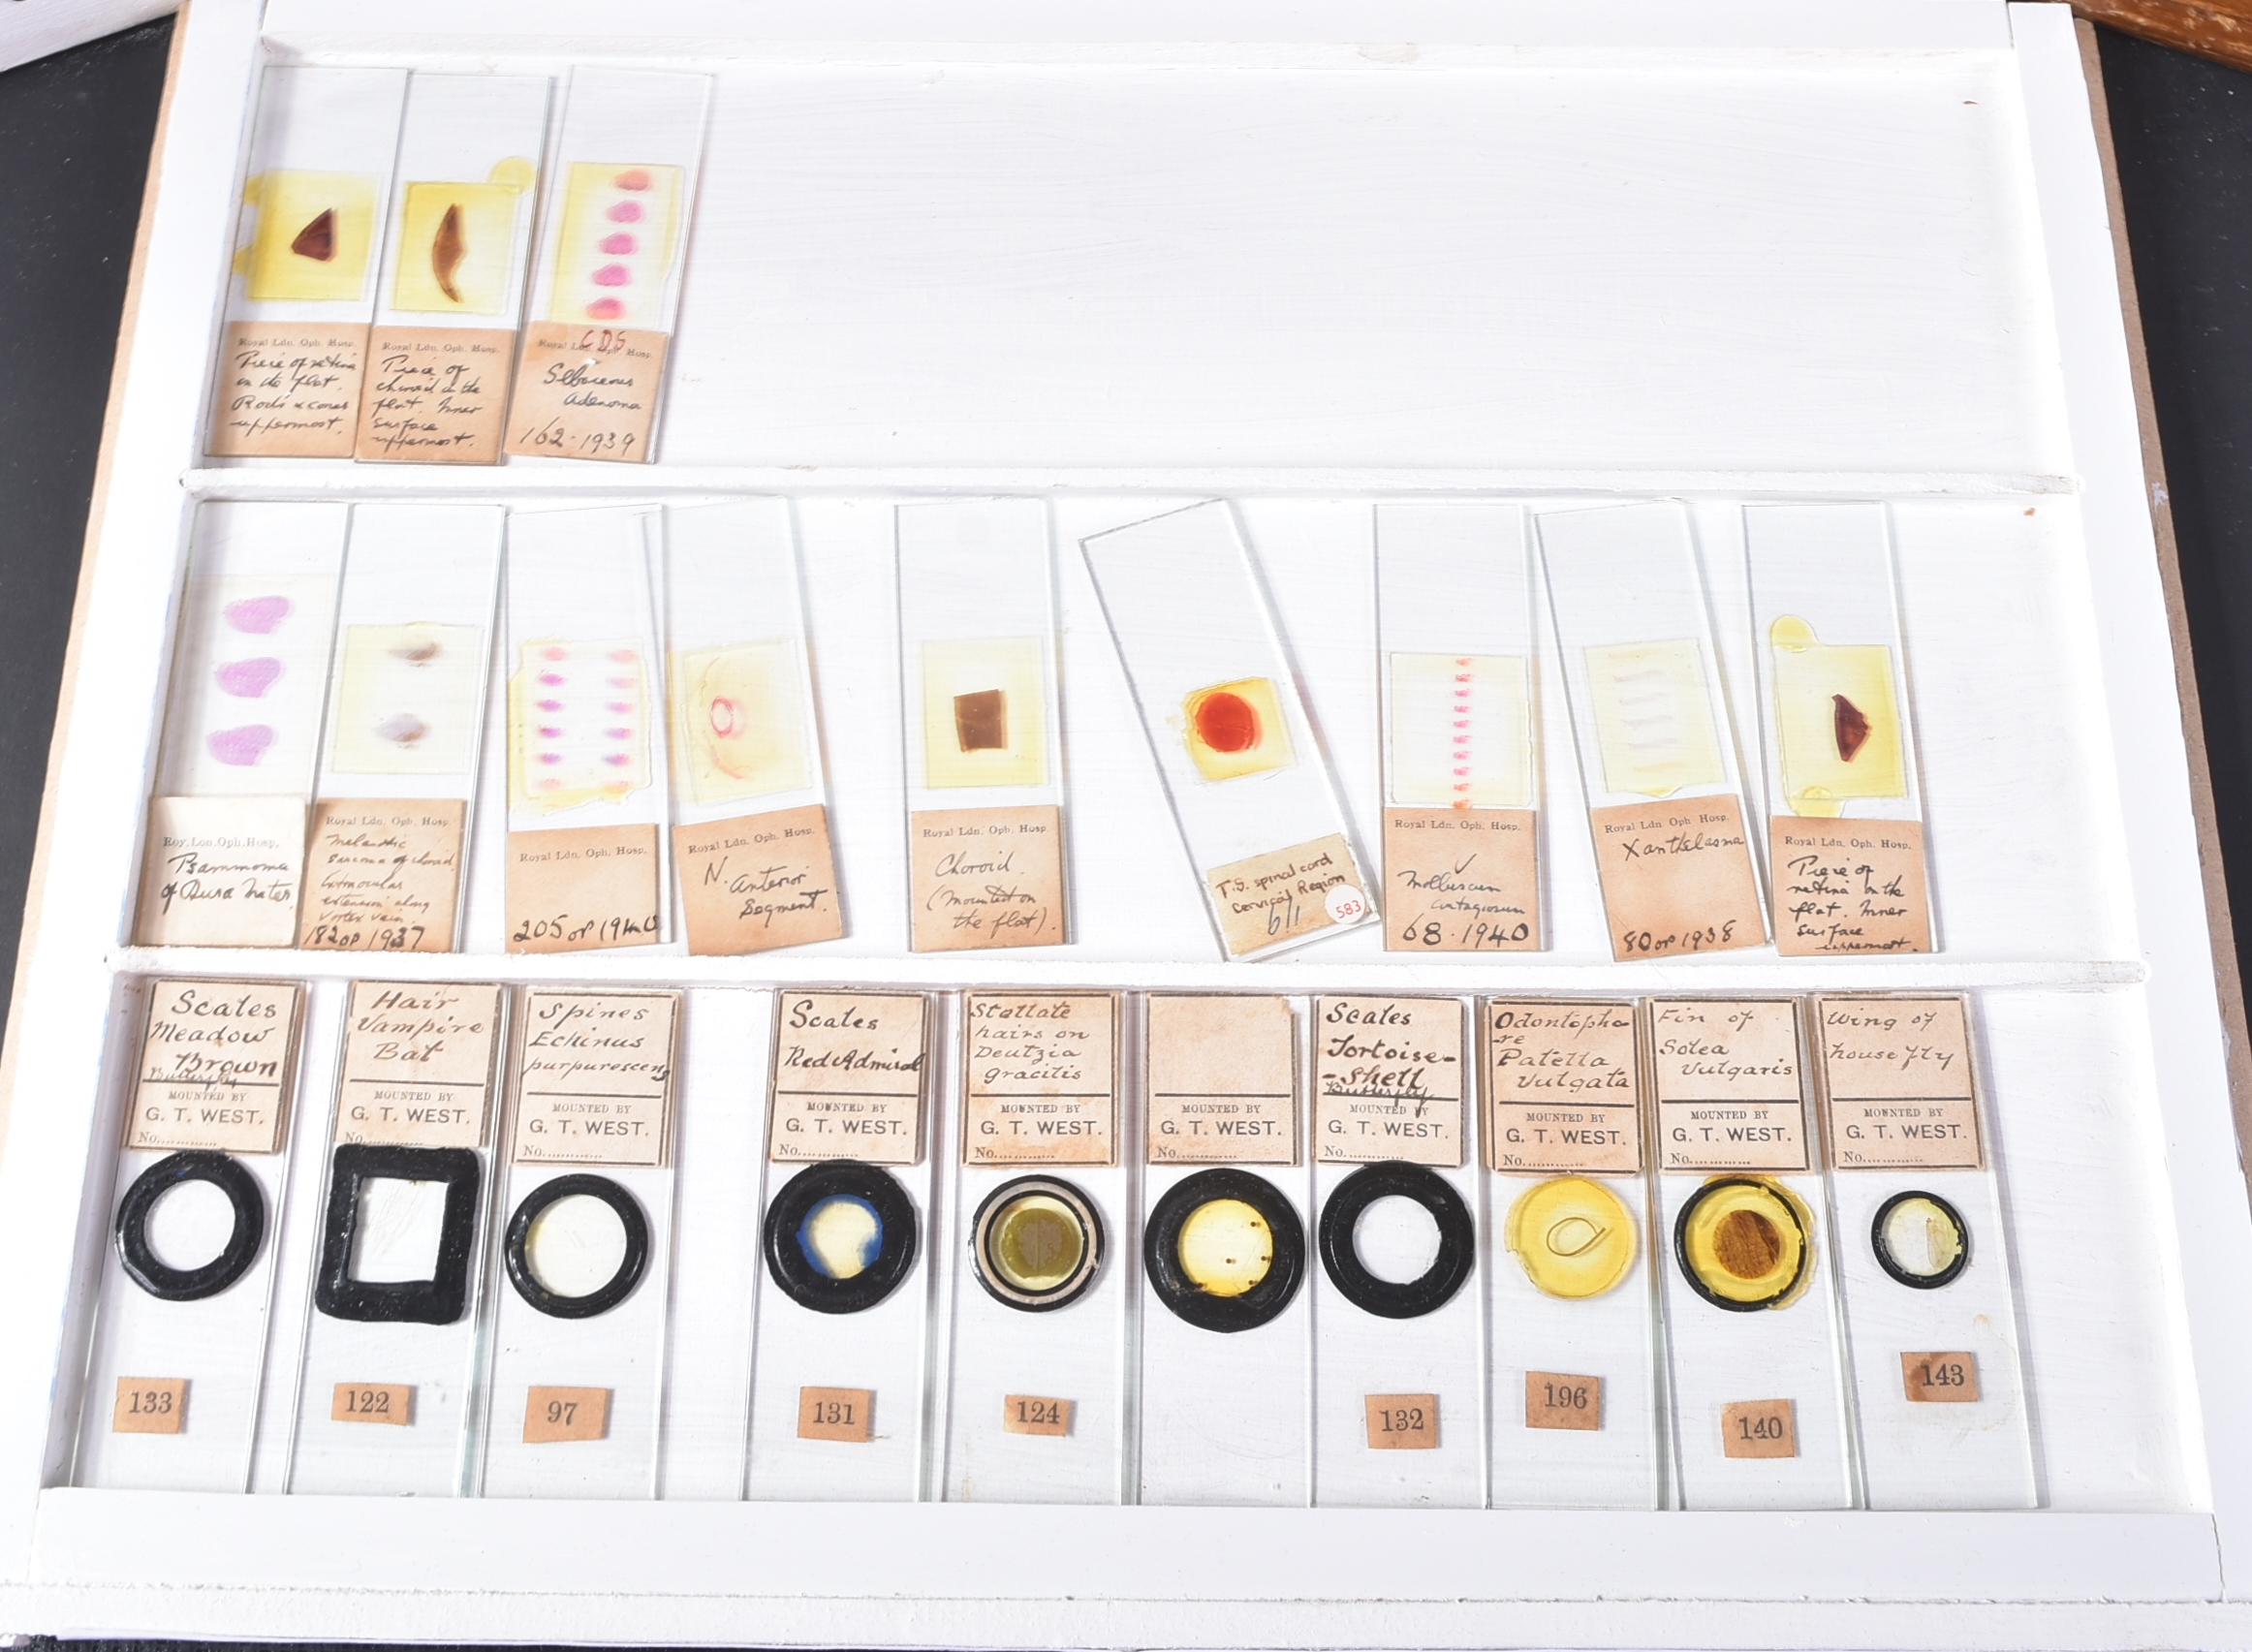 LARGE & EXTENSIVE BECK CABINET MICROSCOPE SLIDE COLLECTION - Image 65 of 101